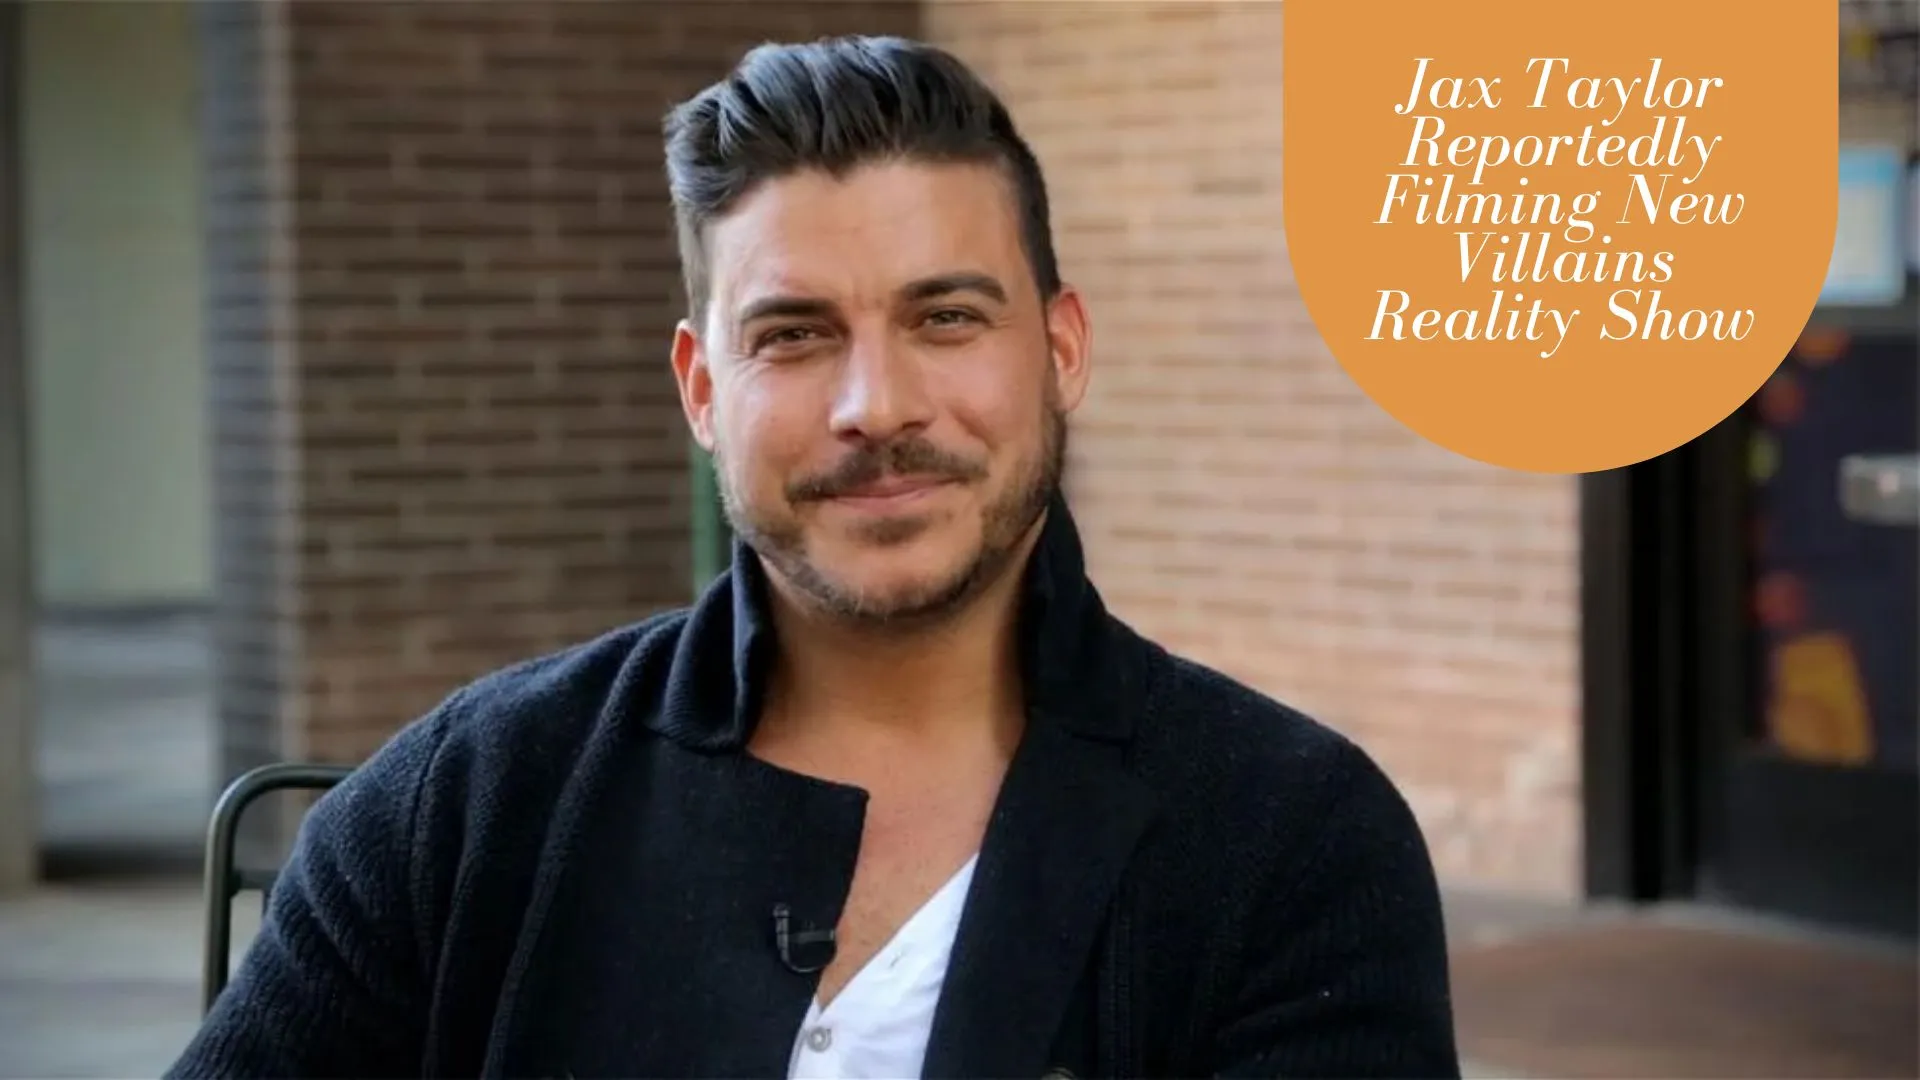 Jax Taylor Reportedly Filming New Villains Reality Show (Image credit: etonline)